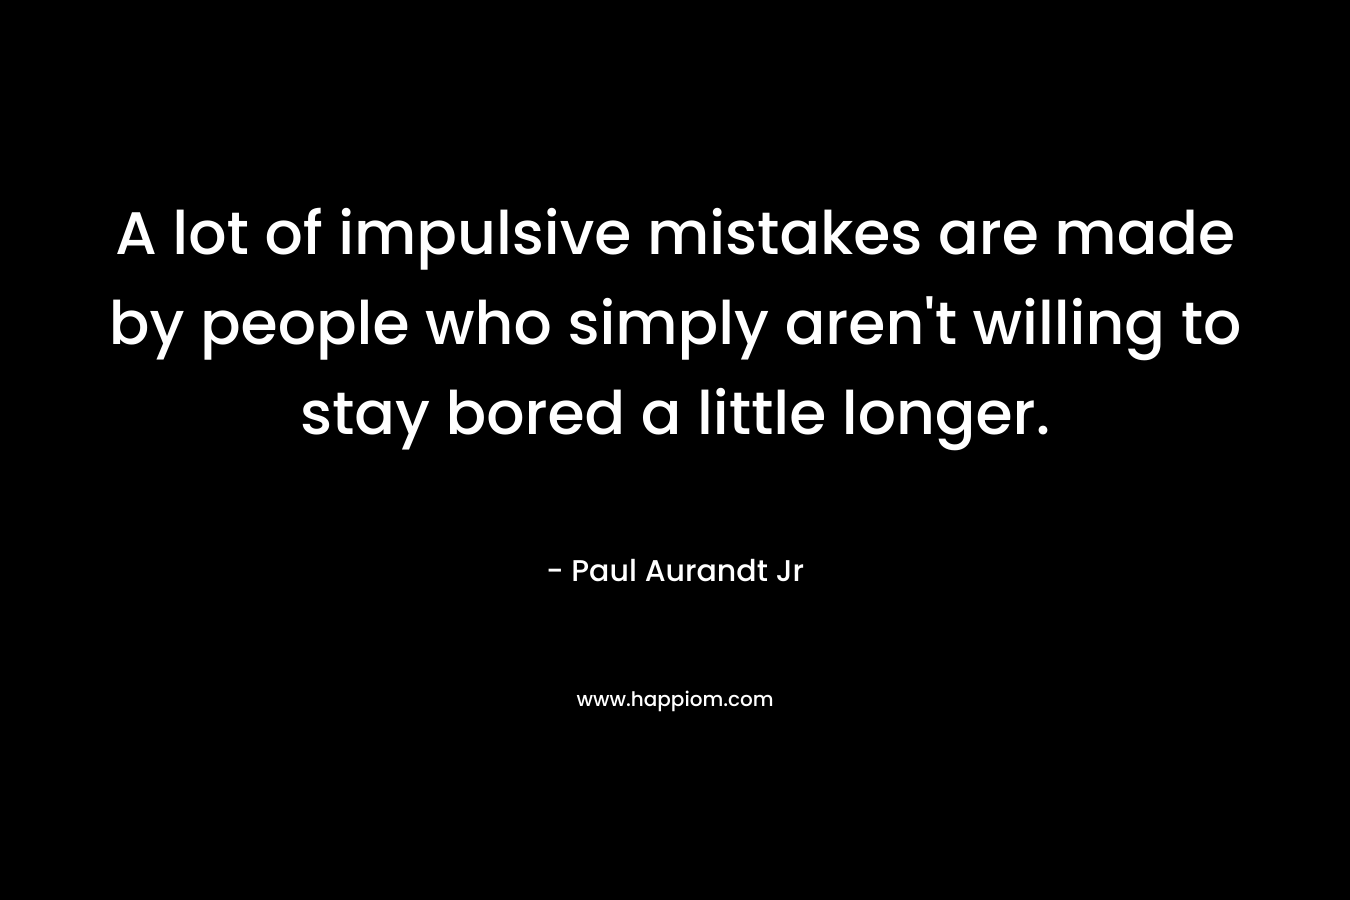 A lot of impulsive mistakes are made by people who simply aren't willing to stay bored a little longer.